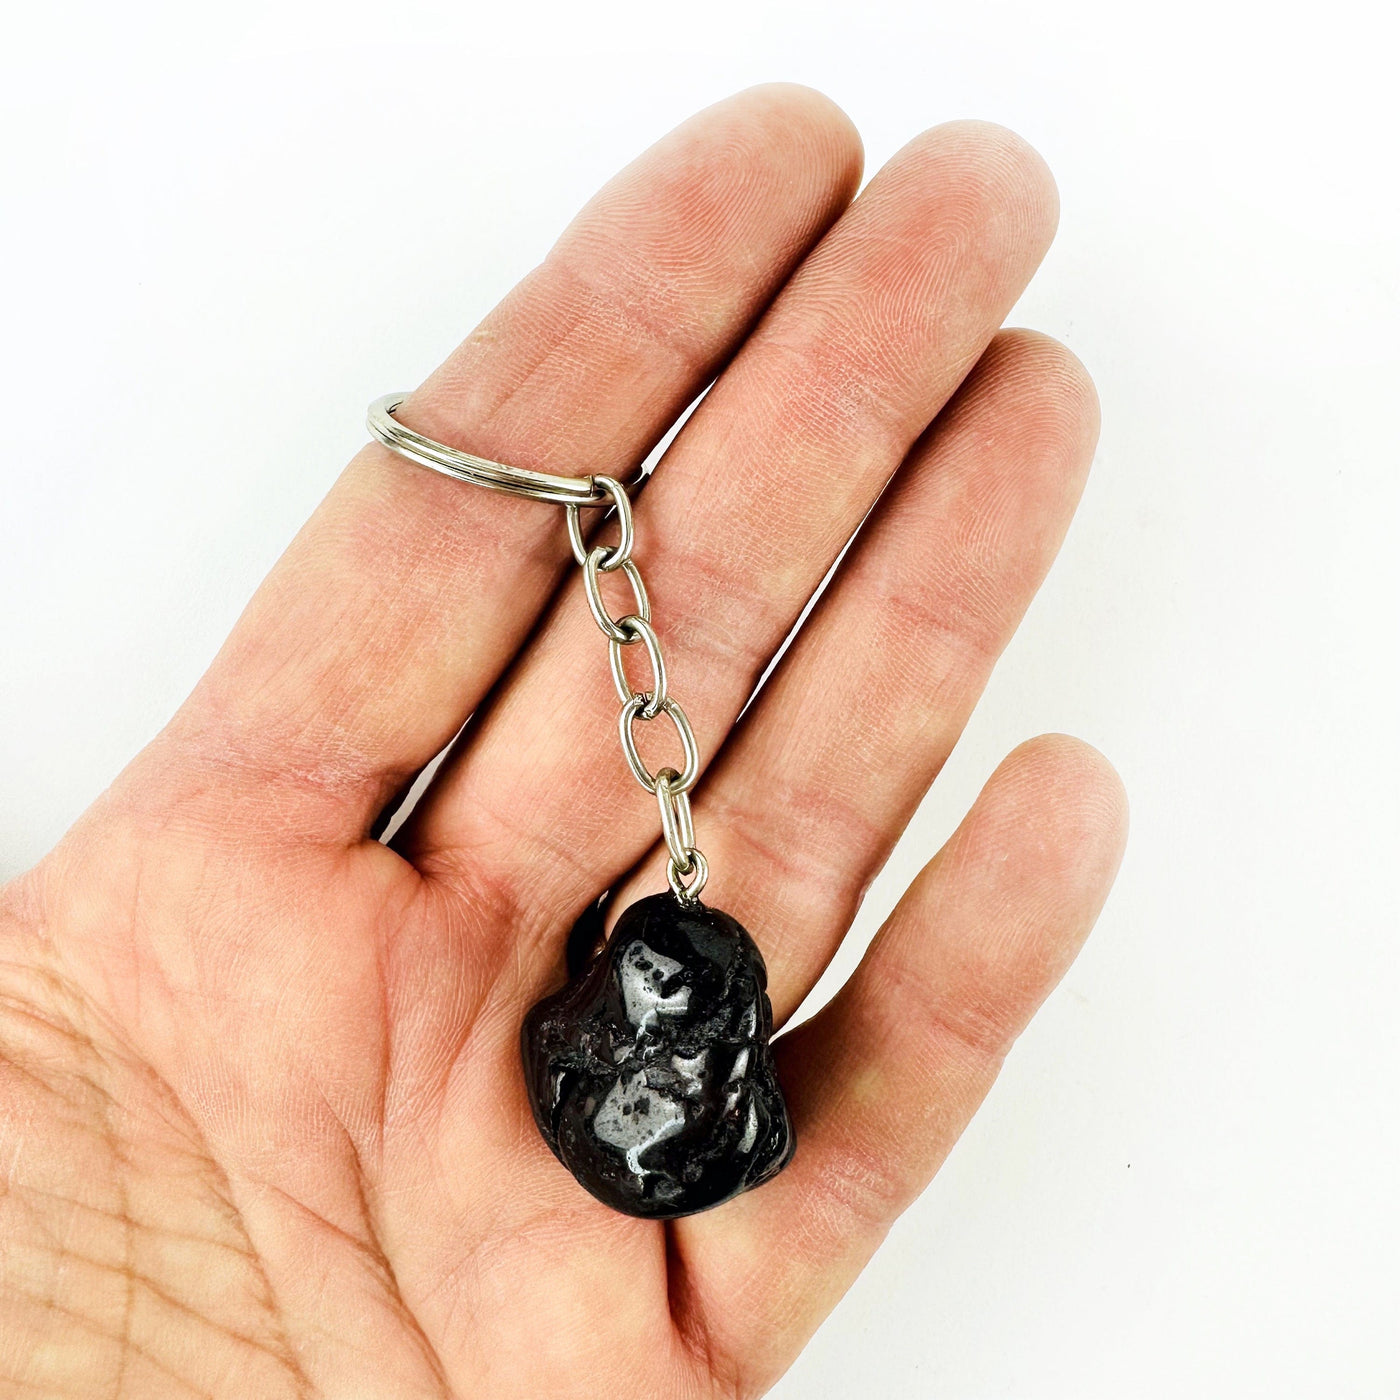 Tumbled Garnet Keychain in a hand for size reference